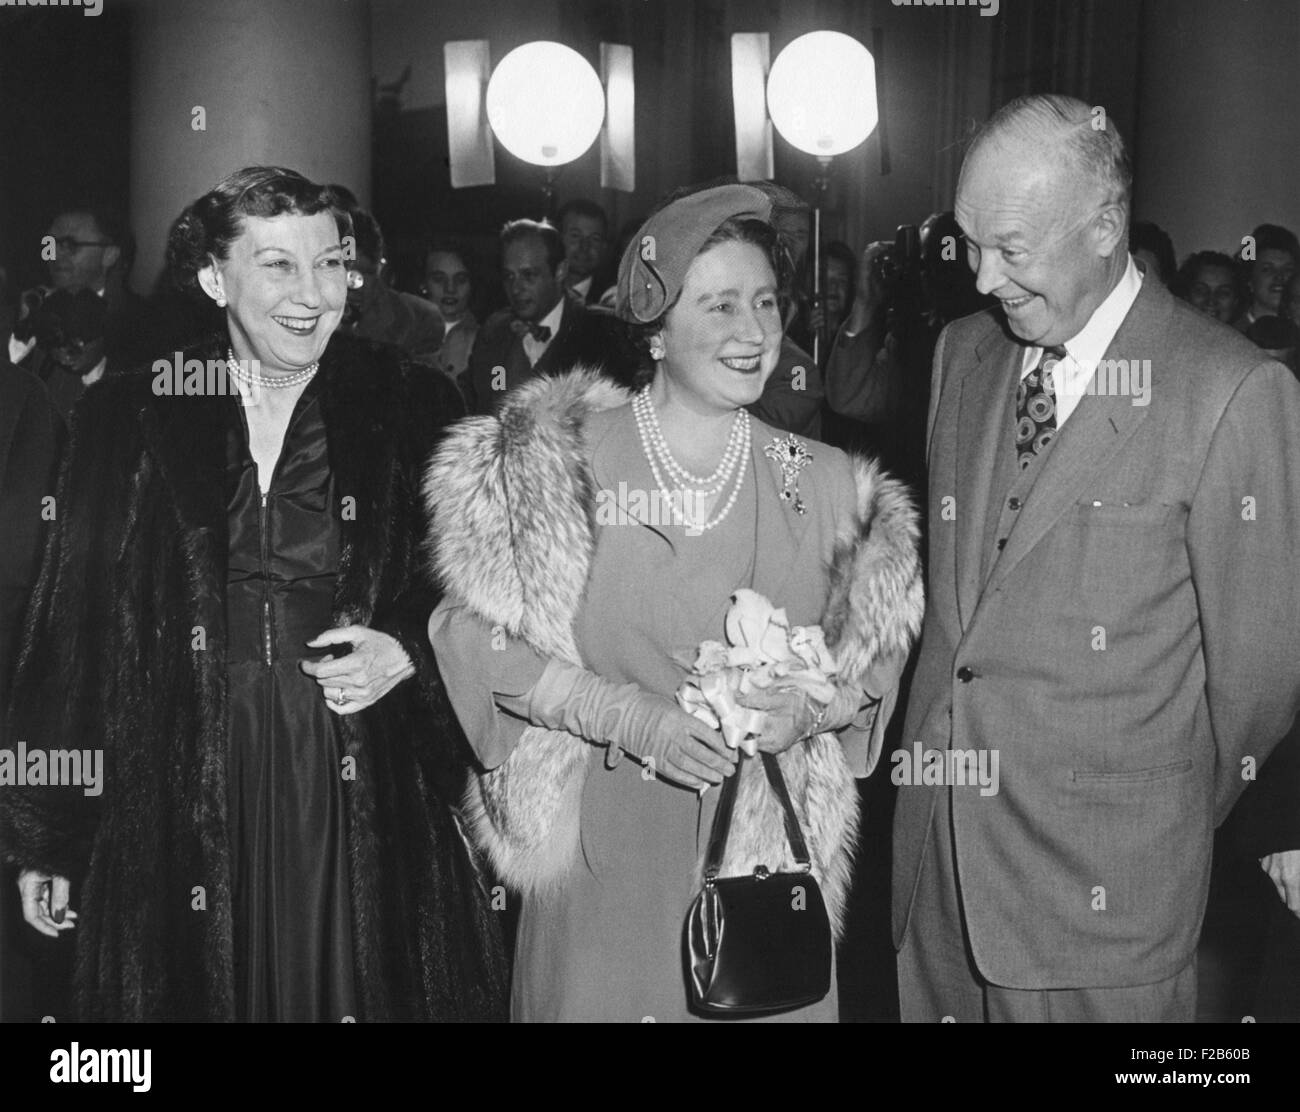 President and Mamie Eisenhower welcome Queen Elizabeth, the Queen Mother, at the White House. Nov. 4, 1954. She was given a dinner followed by a musical performance in the East Room. - (BSLOC_2014_16_203) Stock Photo